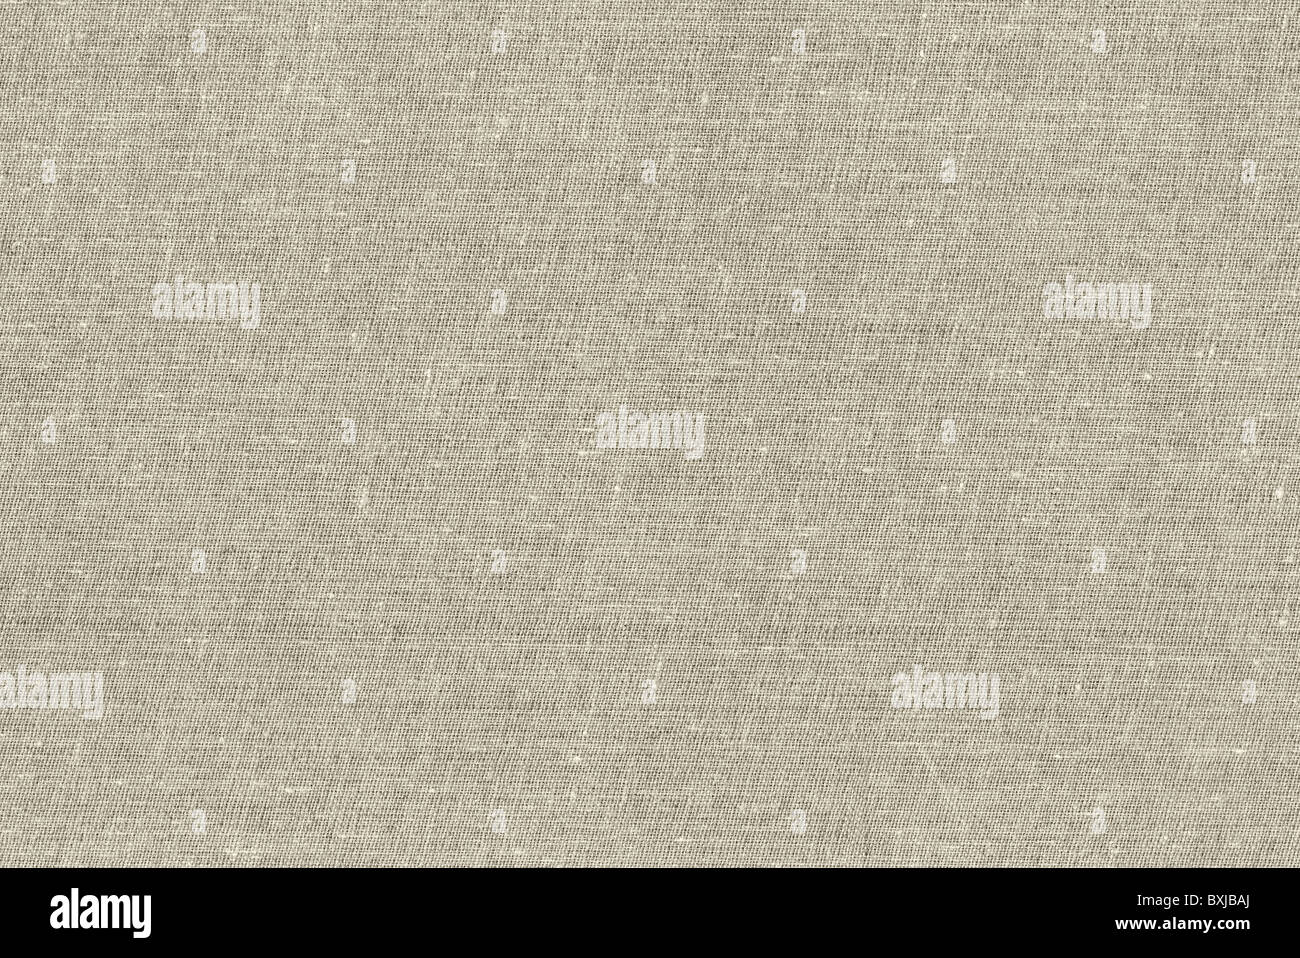 Natural linen striped uncolored textured sacking burlap background Stock Photo